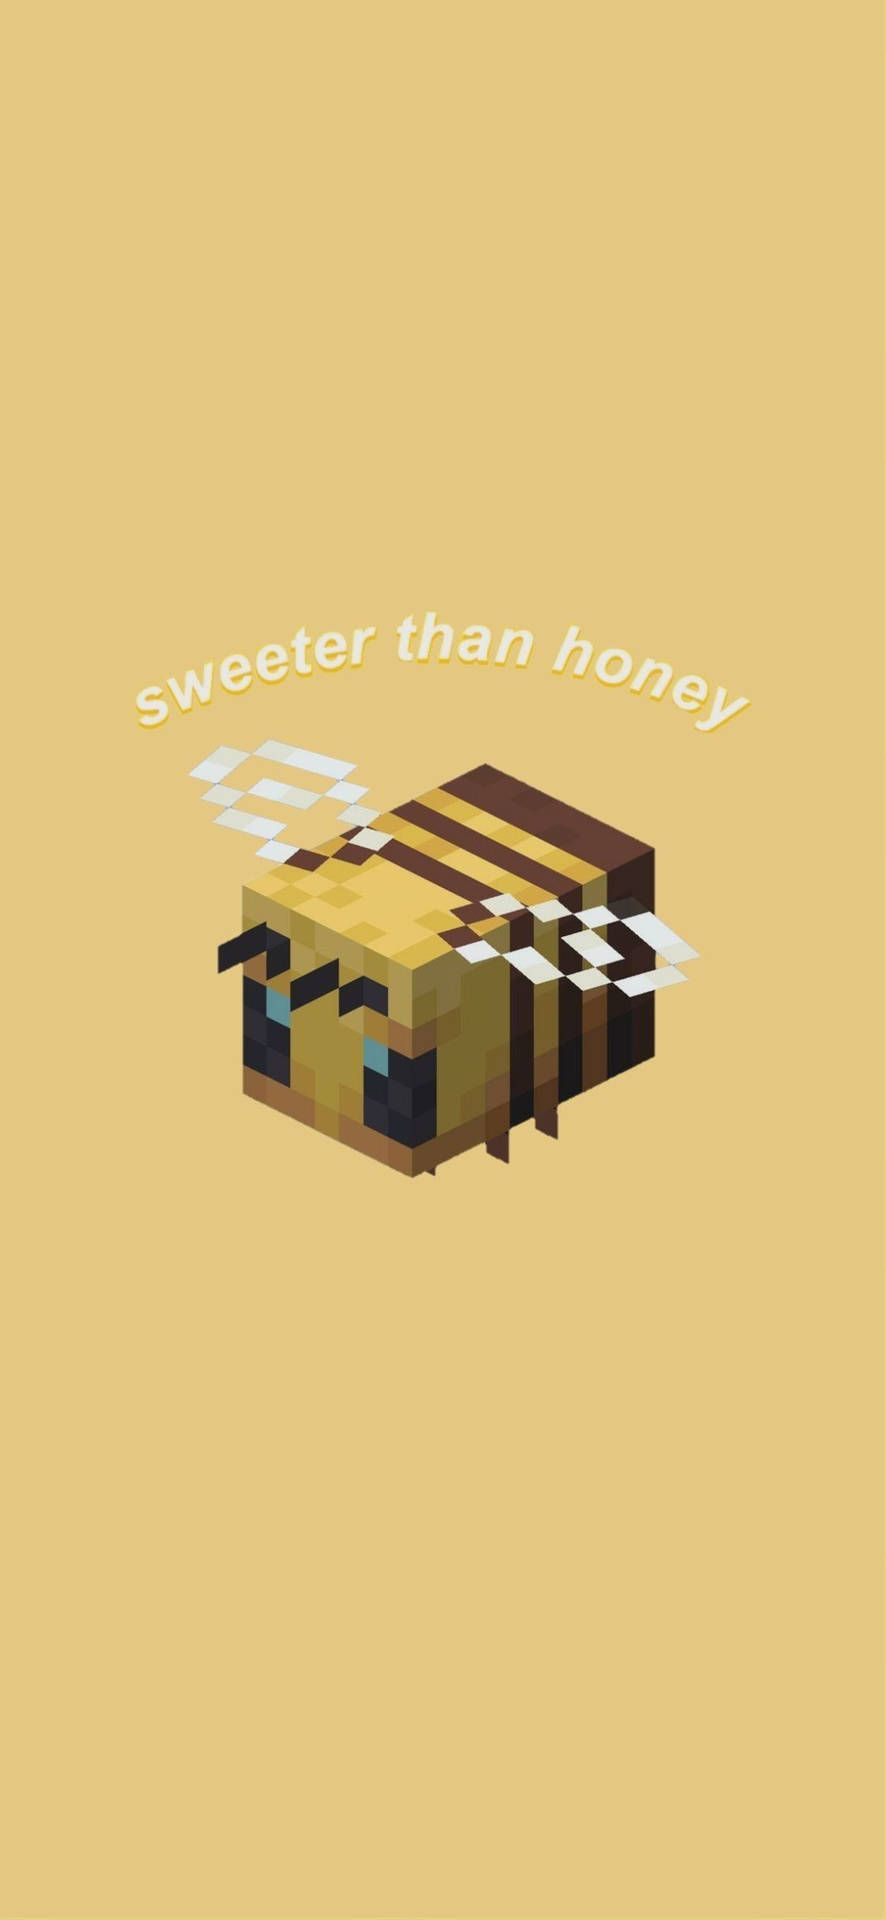 The sweetest thing in minecraft - Honey, bee